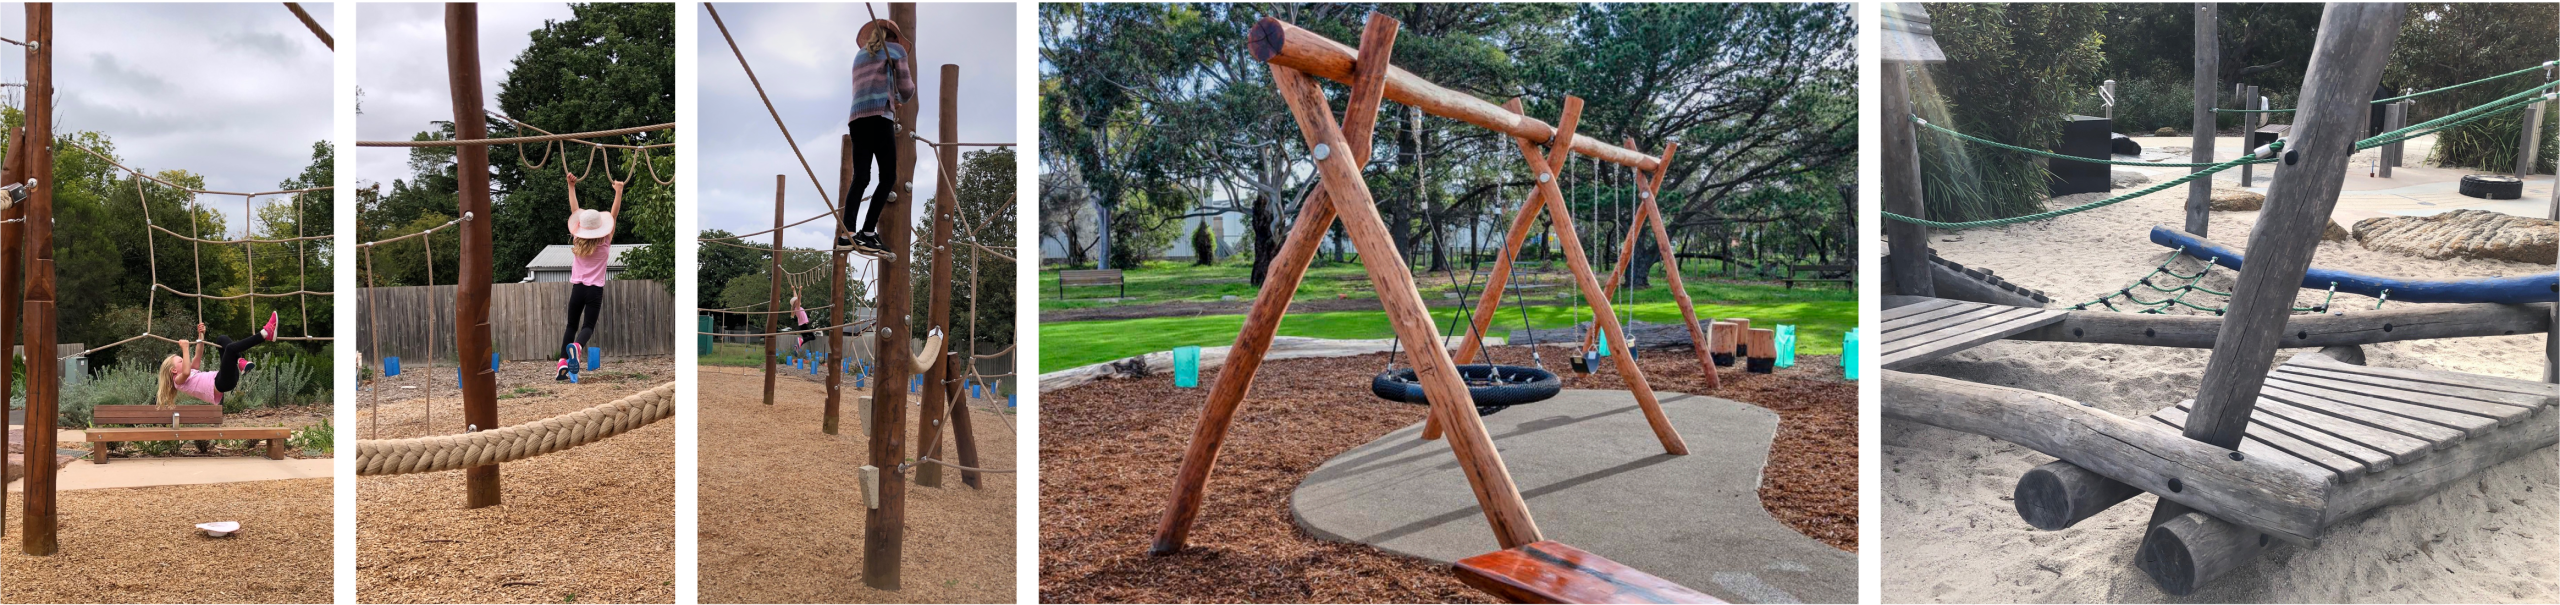 Five images of wooden climbing and swinging play equipment